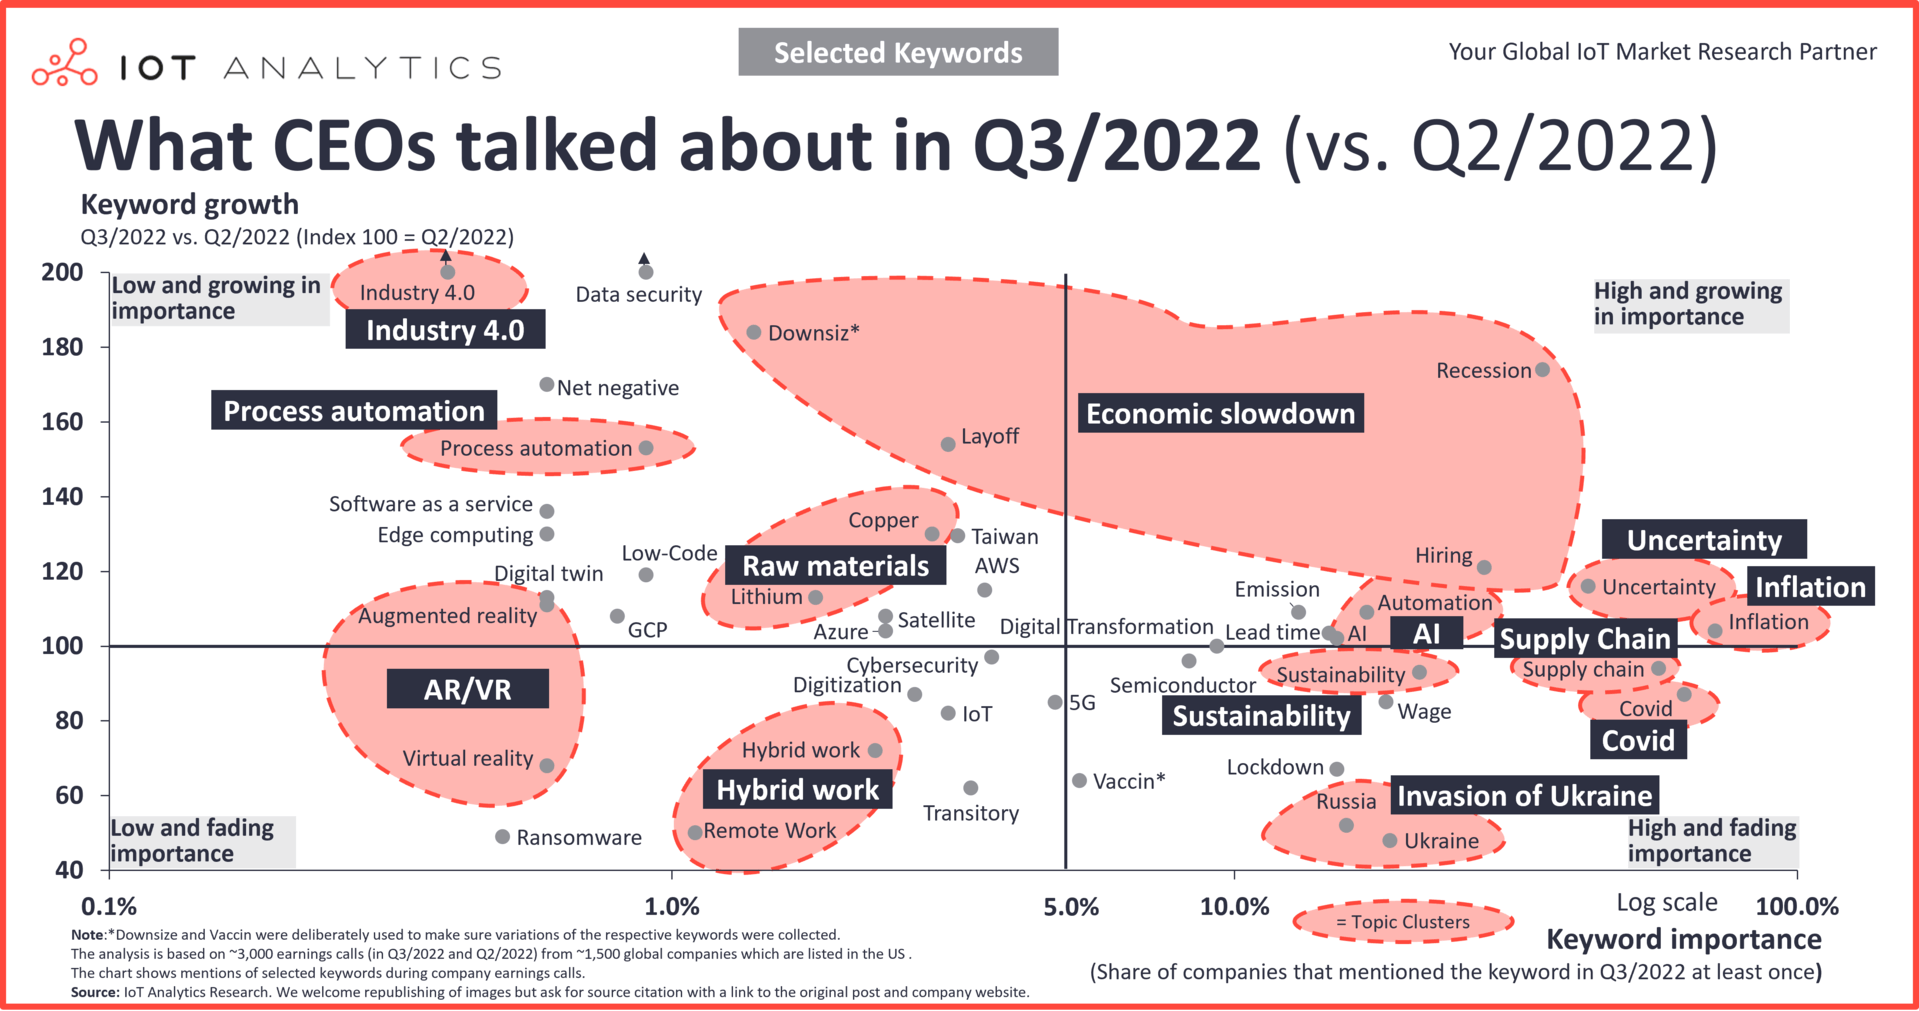 What CEOs talked about in Q3/2022 vs Q2/2022